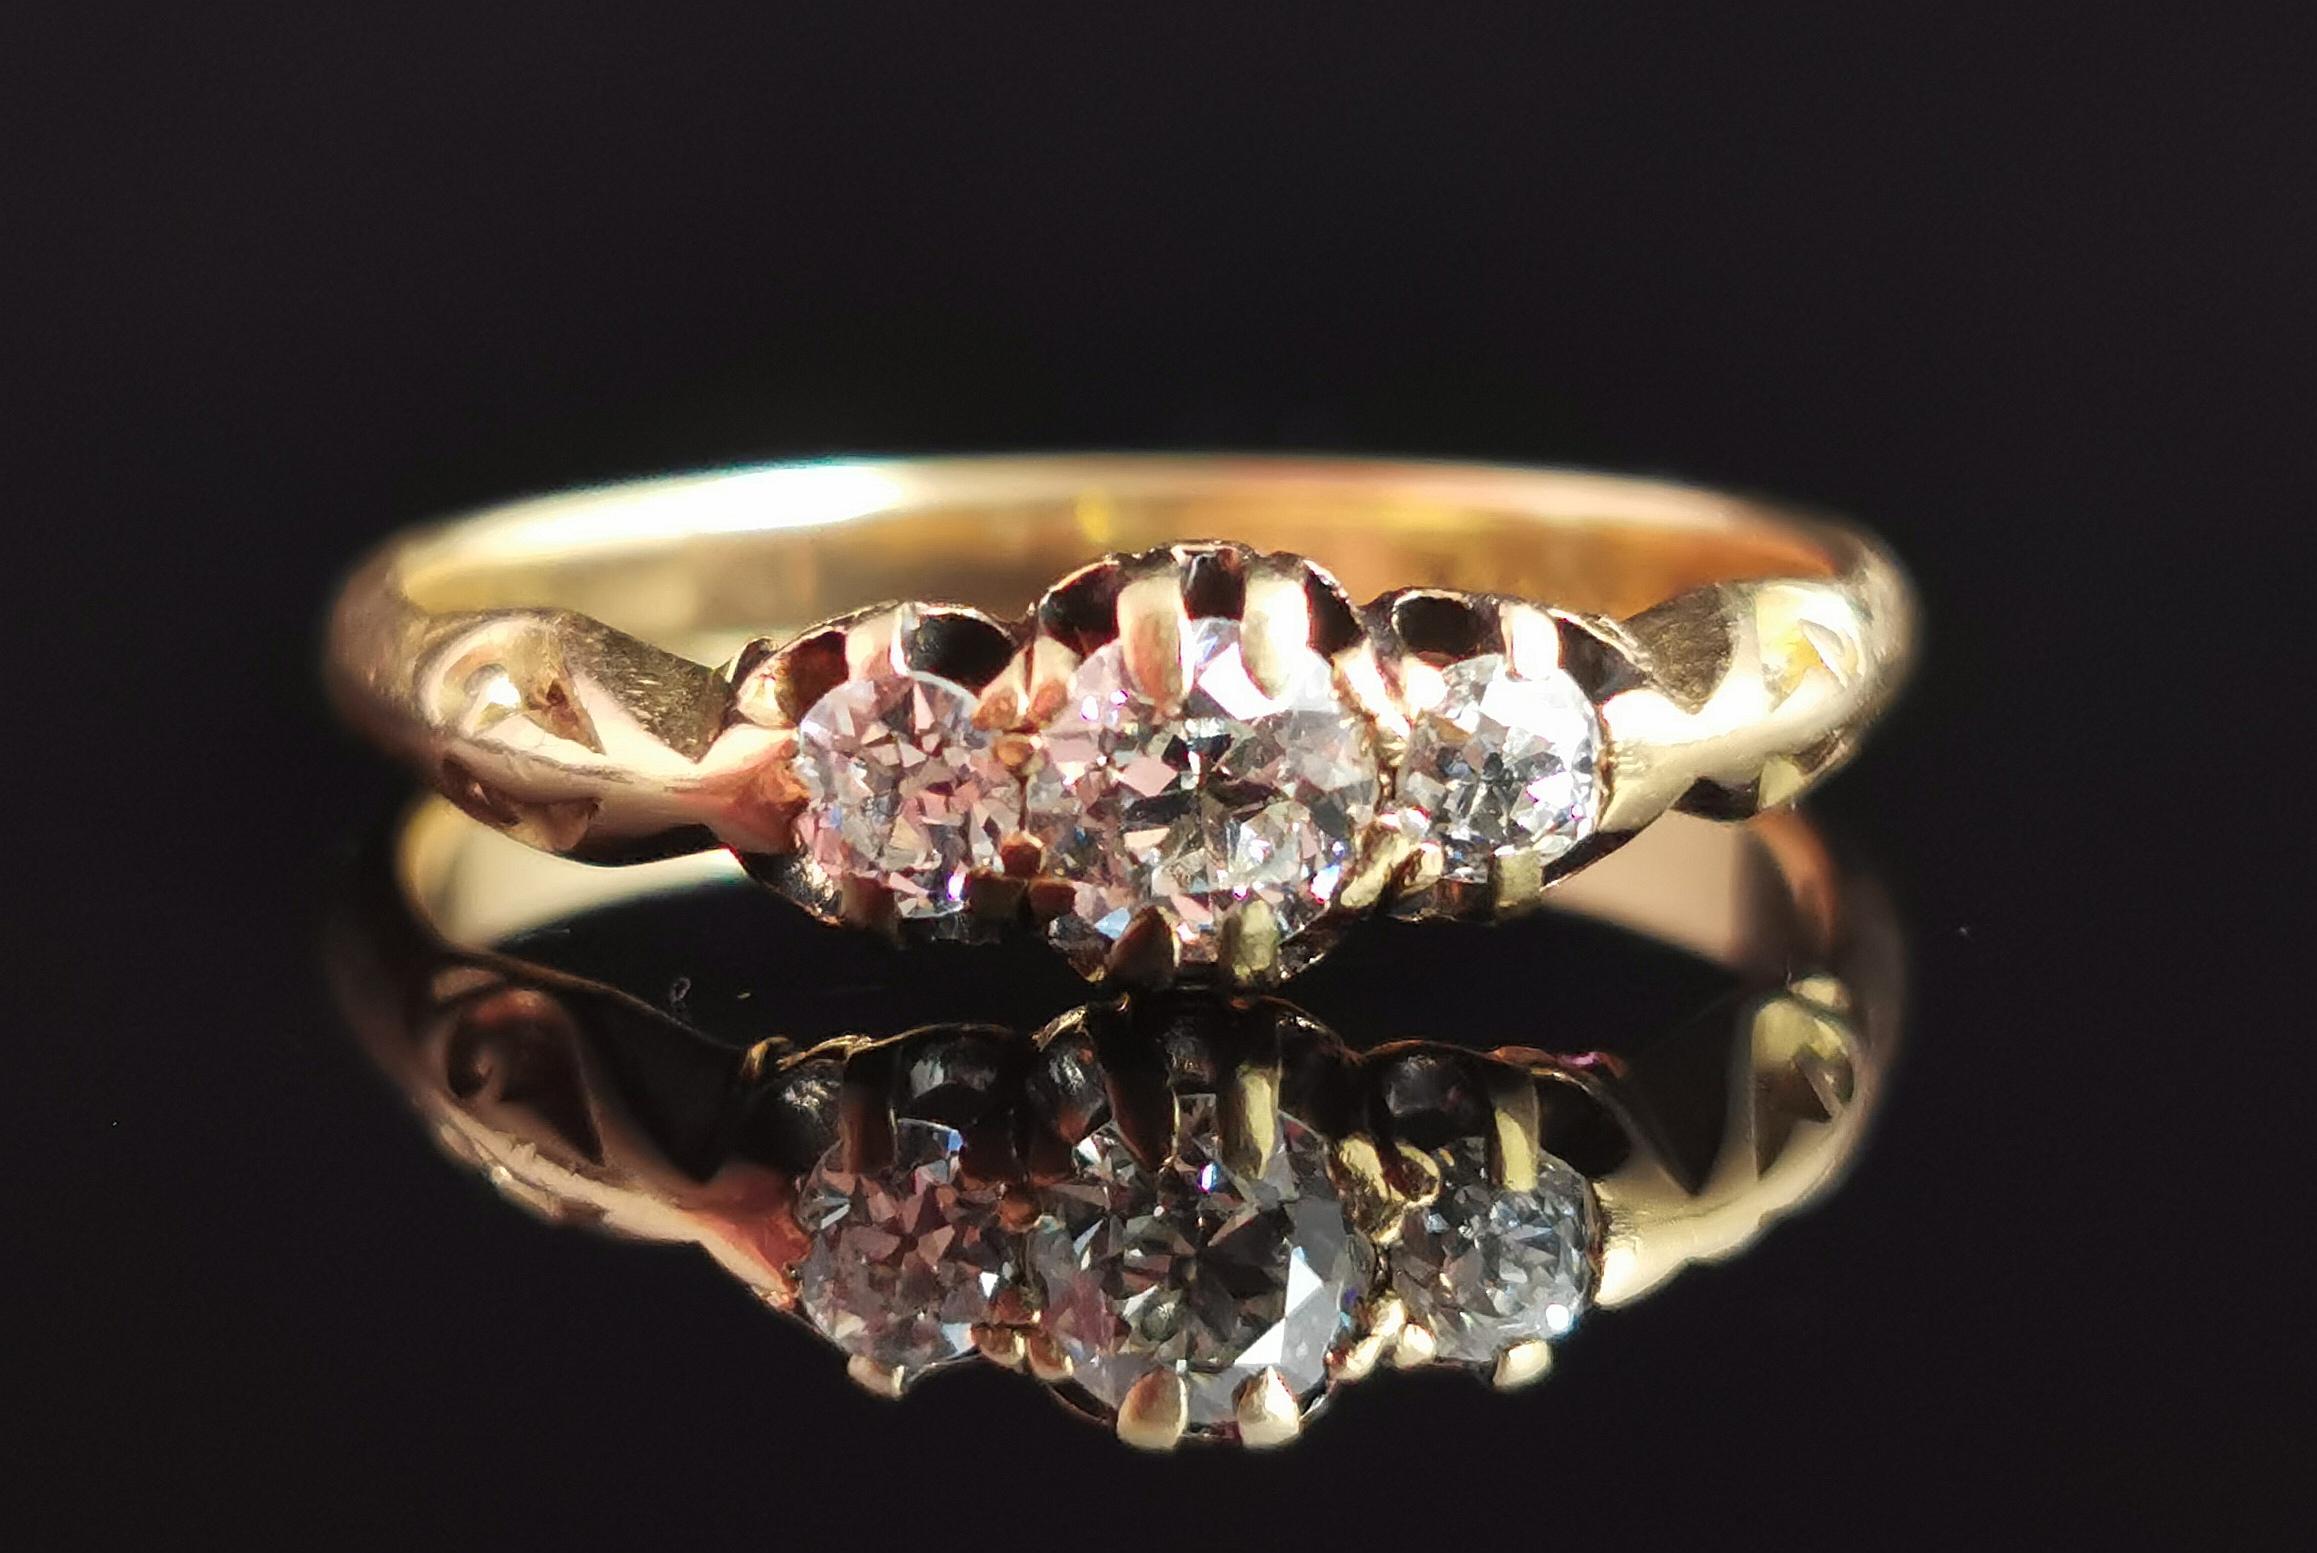 A beautiful antique 18kt gold and diamond three stone ring.

Smooth and rich 18kt yellow gold band with decorative engraved detailing to the shoulders.

Set with three single sparkling old cut diamonds with sparkle that twinkles in the light, they